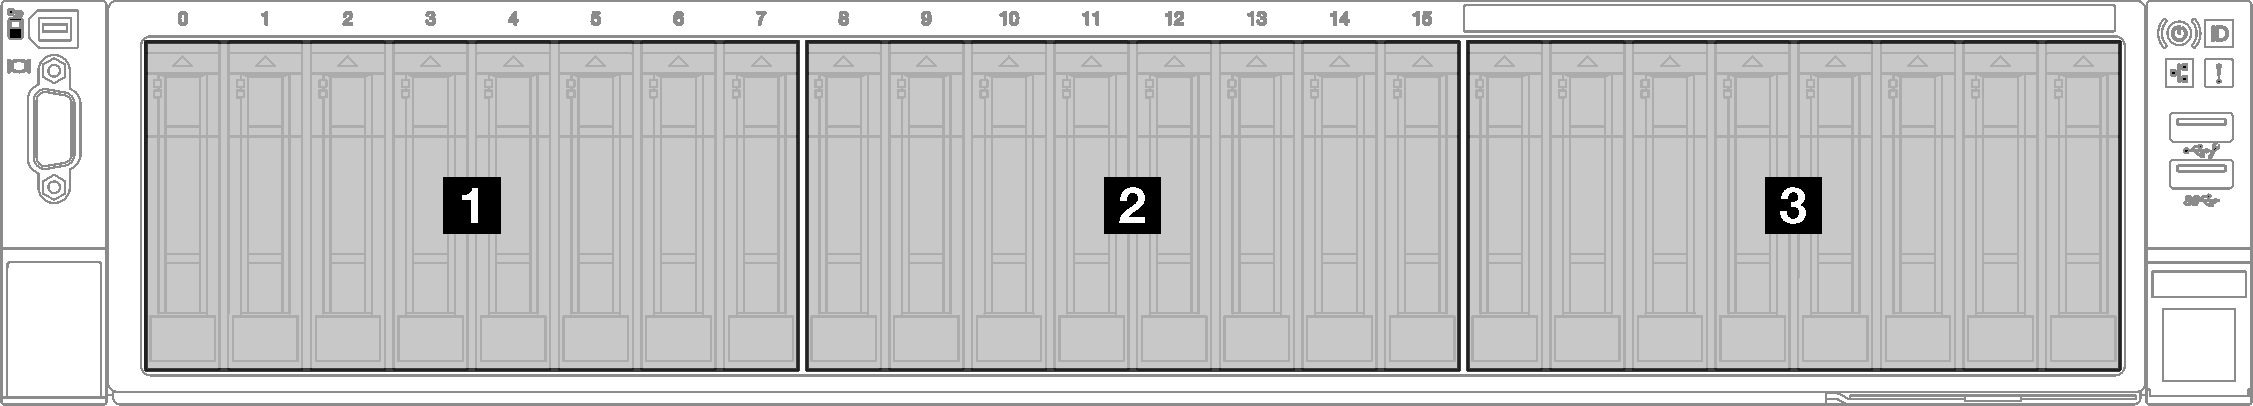 2.5-inch drive backplane numbering